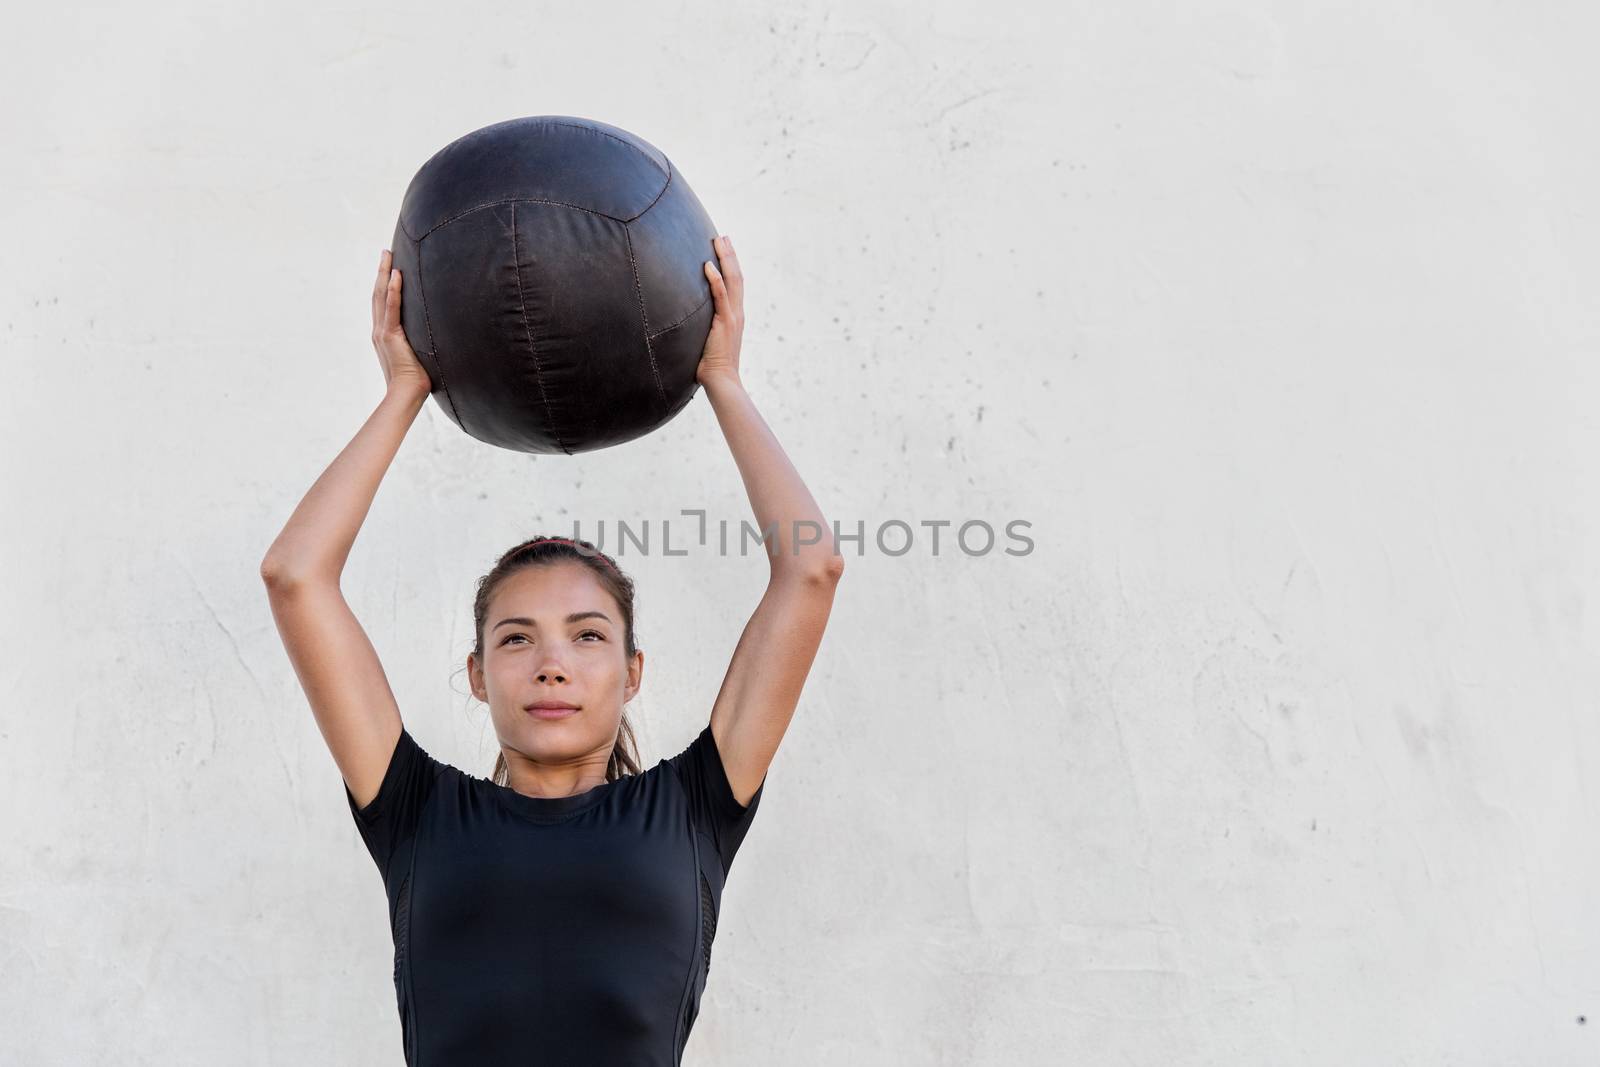 Fitness crossfit girl holding medicine ball above head for shoulder press workout in outdoor crossfit gym. Young Asian athlete girl doing upper body exercise working out with heavy weighted balls.